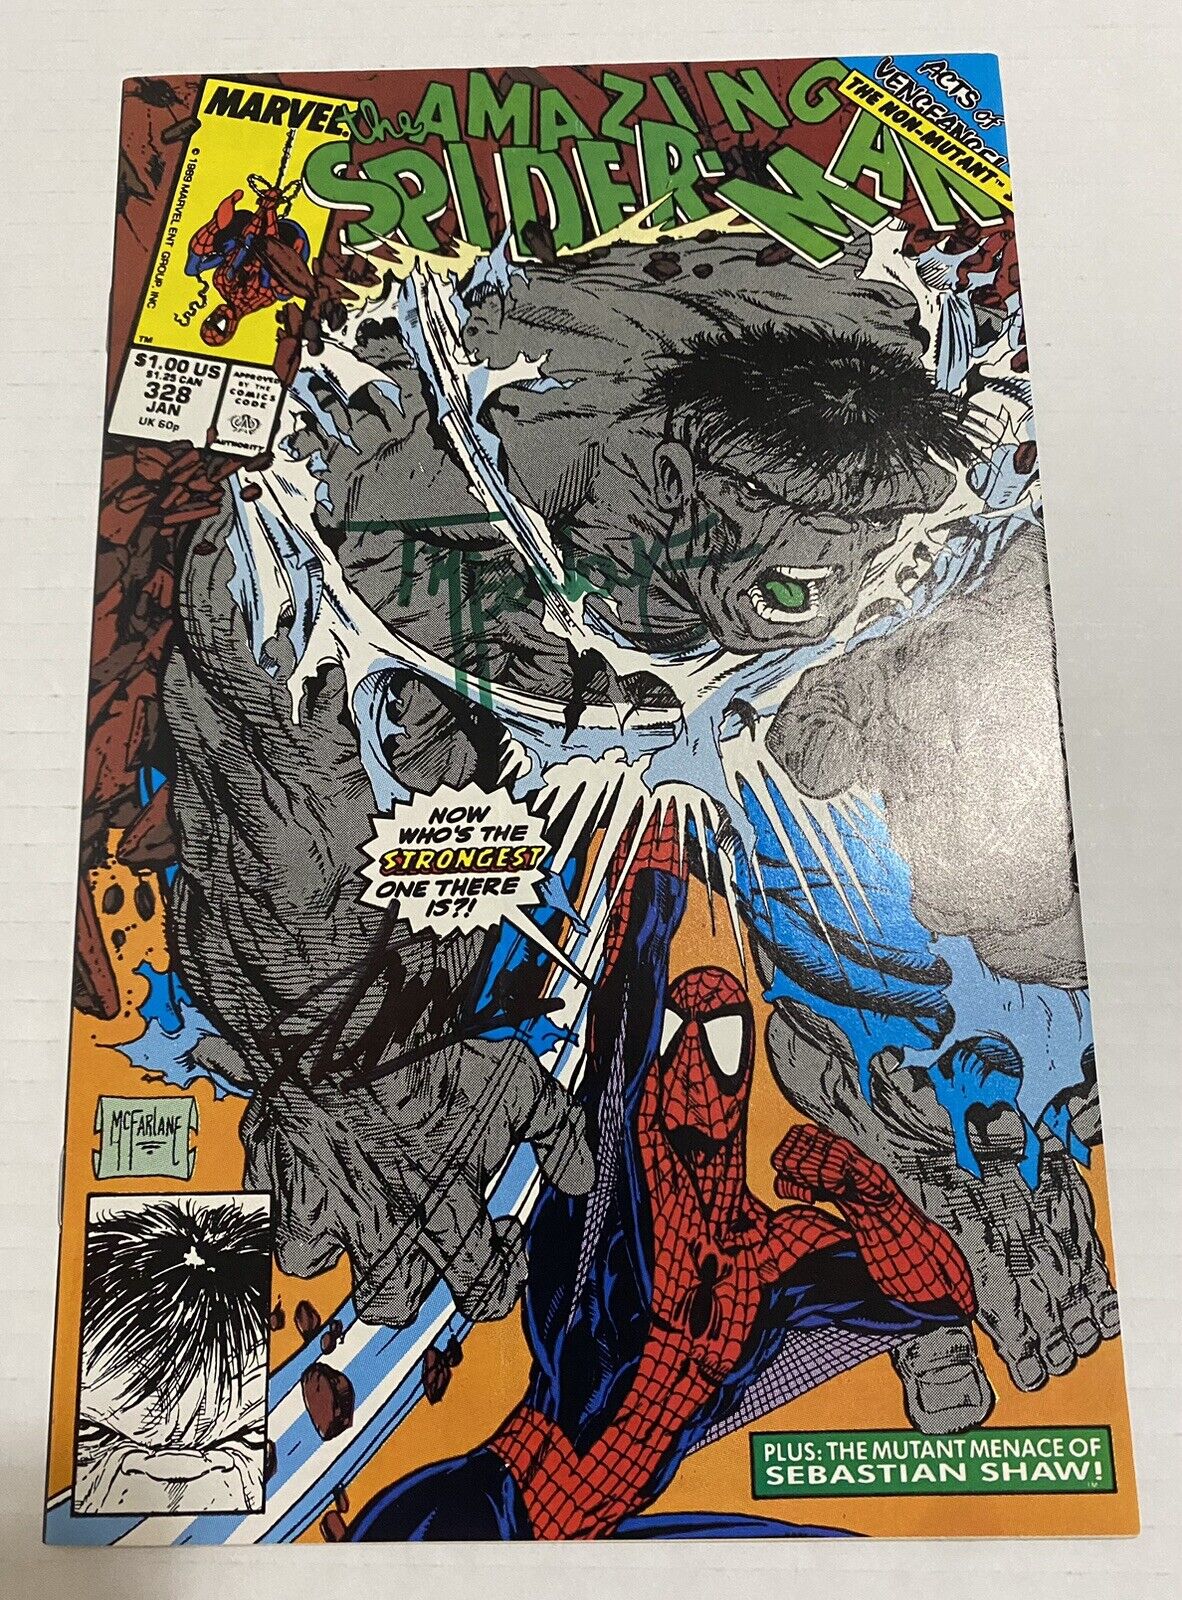 Amazing Spider-Man #328 Signed Stan Lee & Todd McFarlane VS Hulk Classic Cover